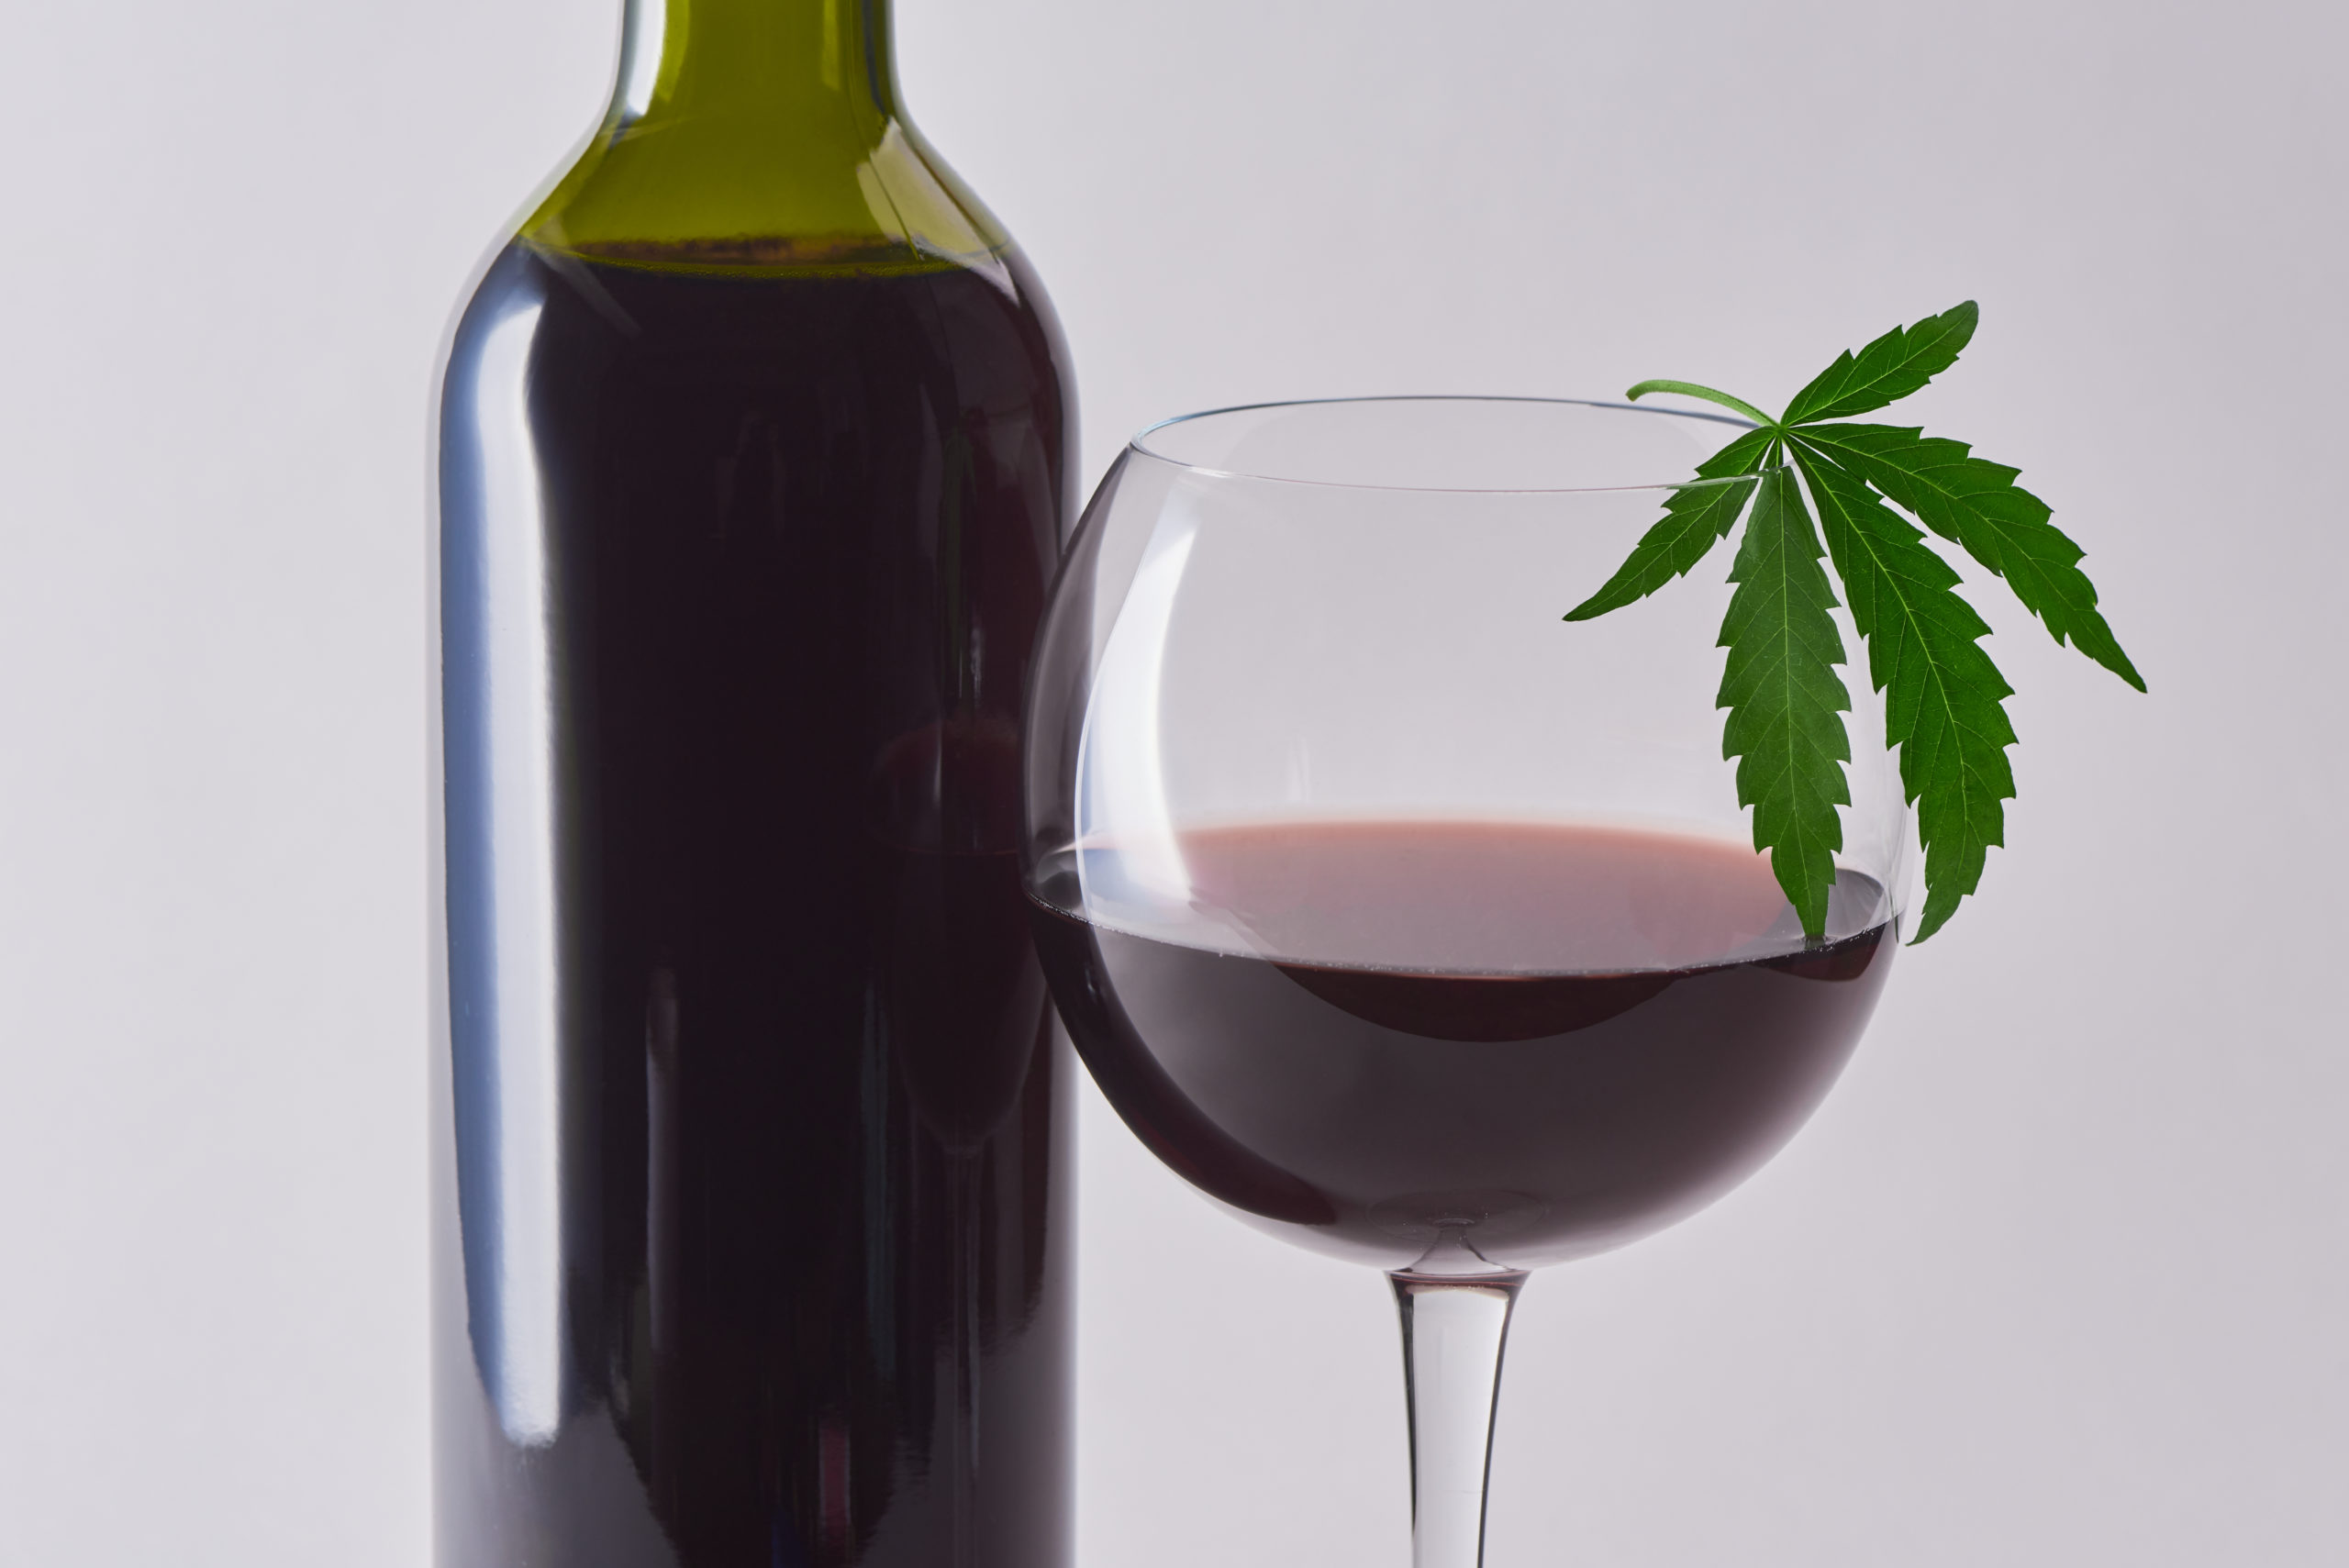 A filled bottle of wine and a half-filled glass of wine having a cannabis leaf at its tip